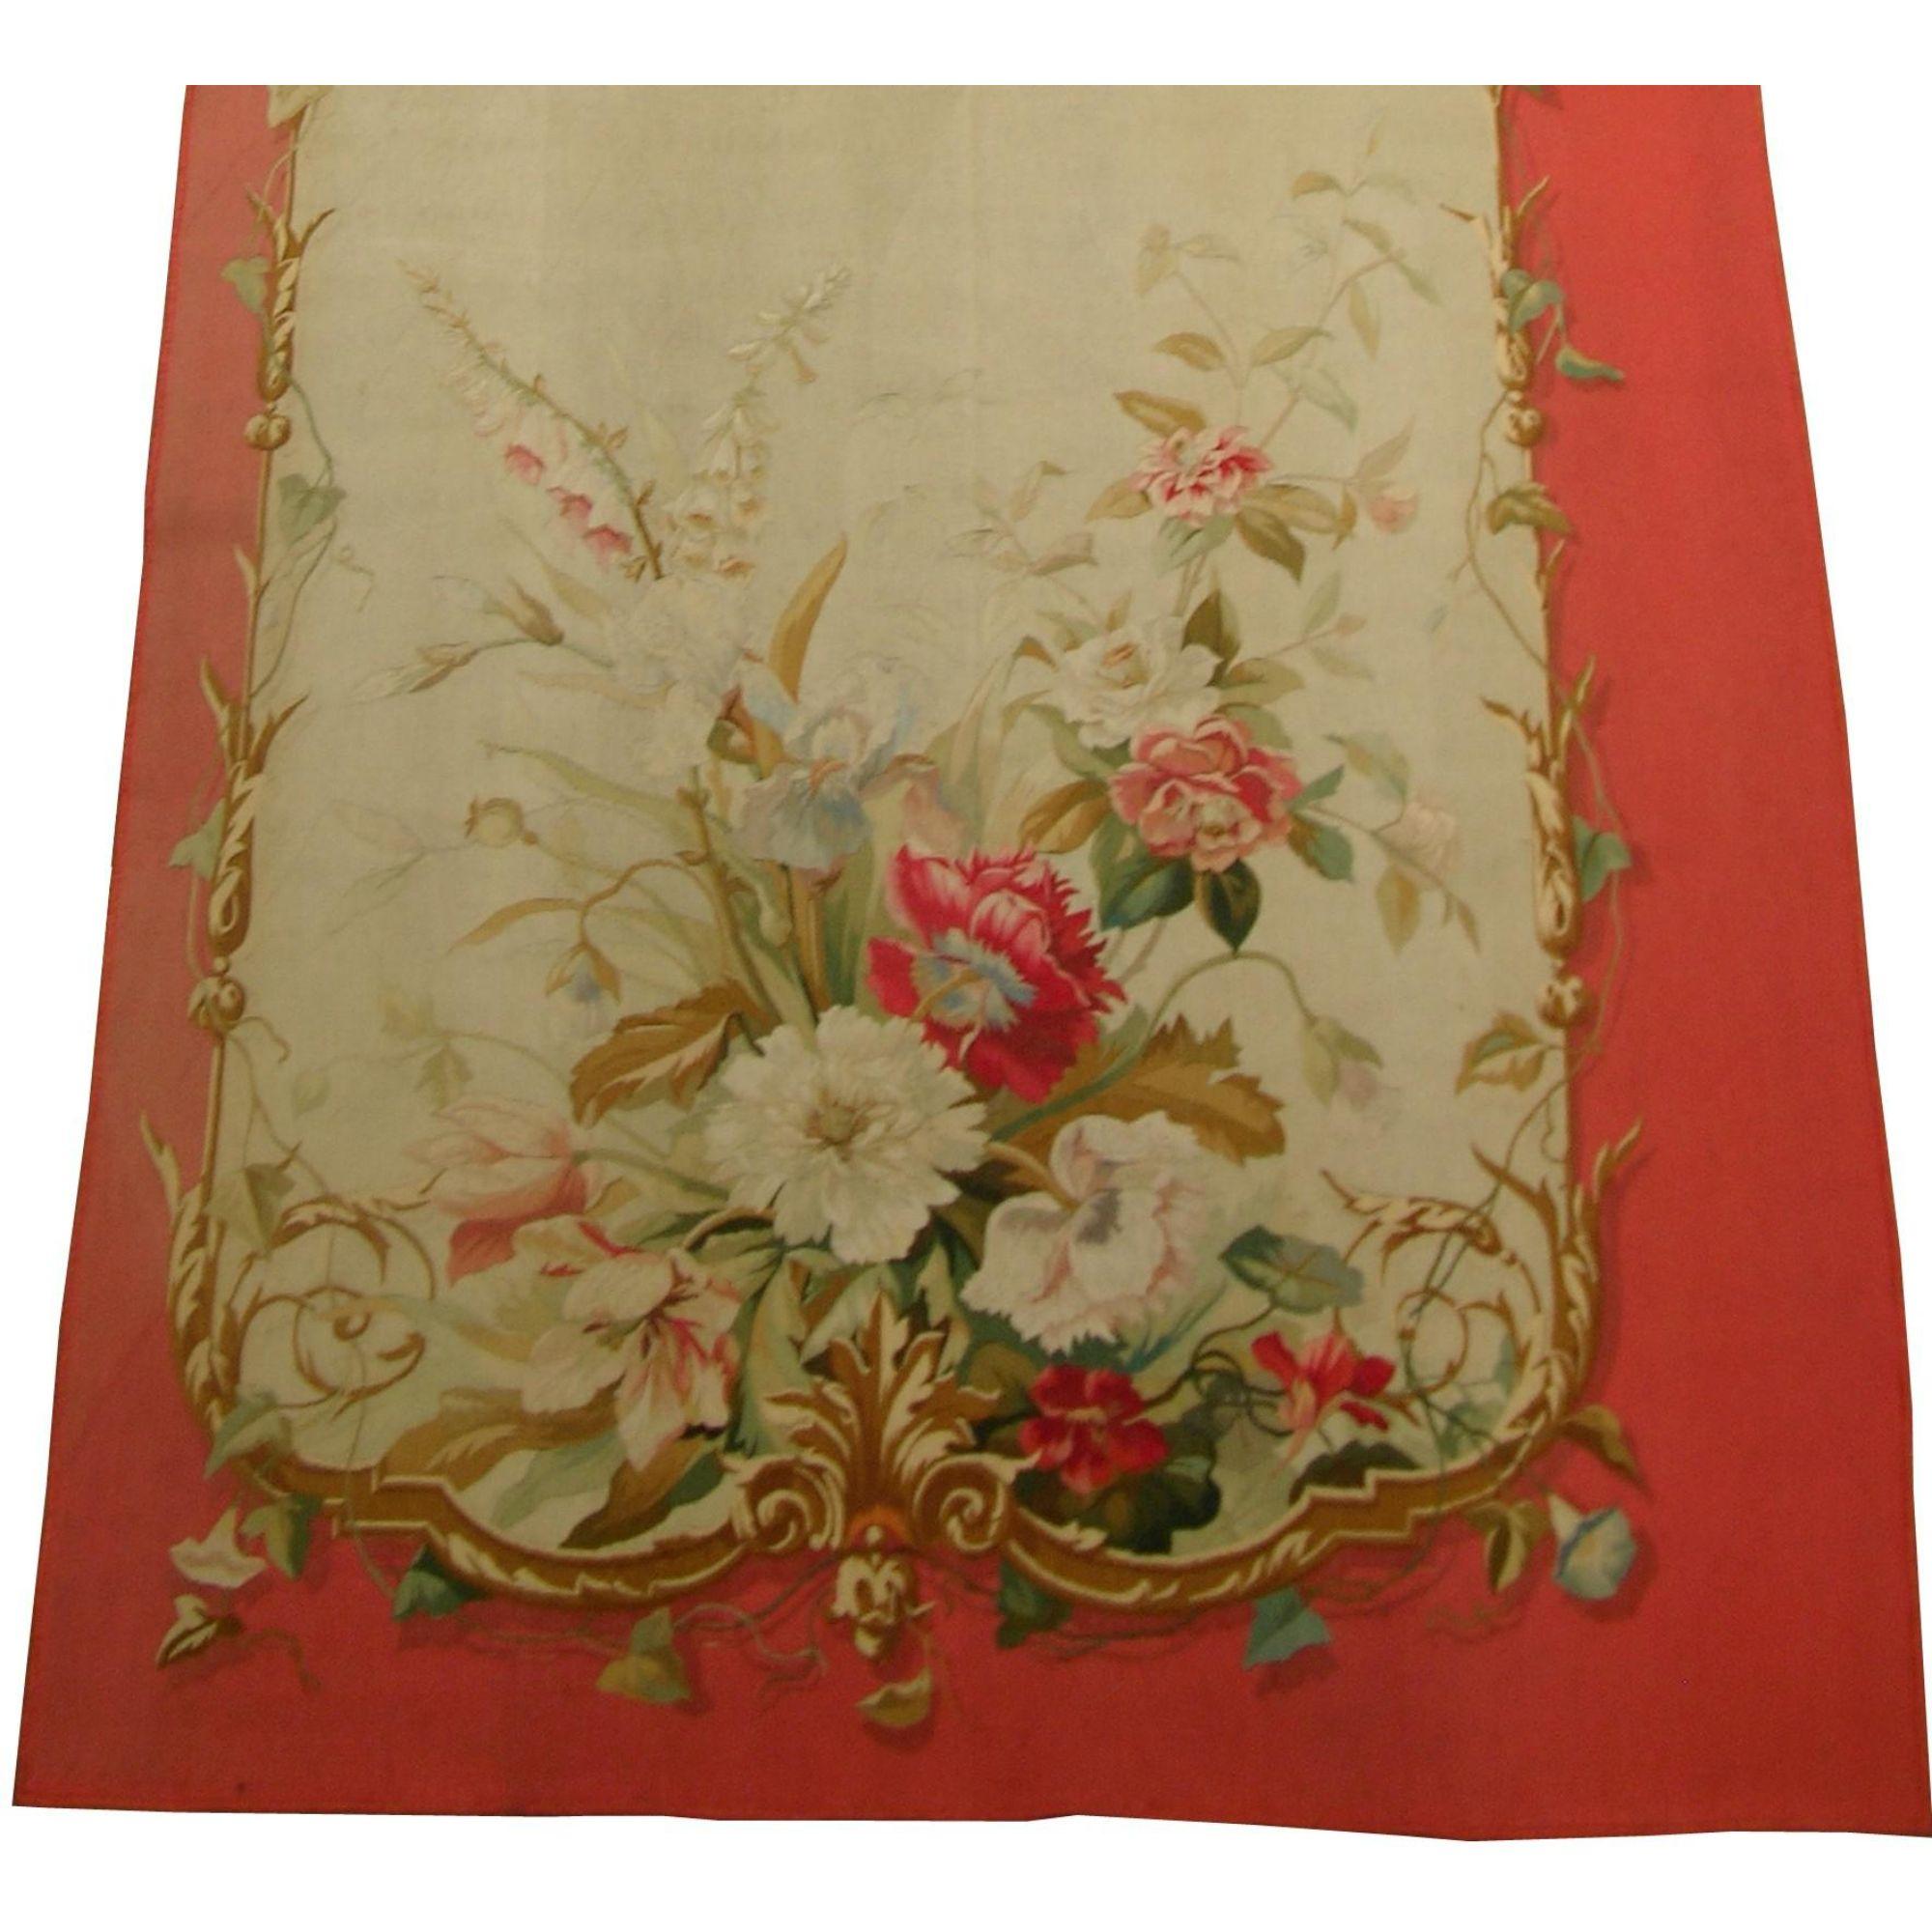 Extremely rare handmade and needlework French tapestry wall hanging. Traditional and Victorian design, extremely classic and history behind this masterpiece.